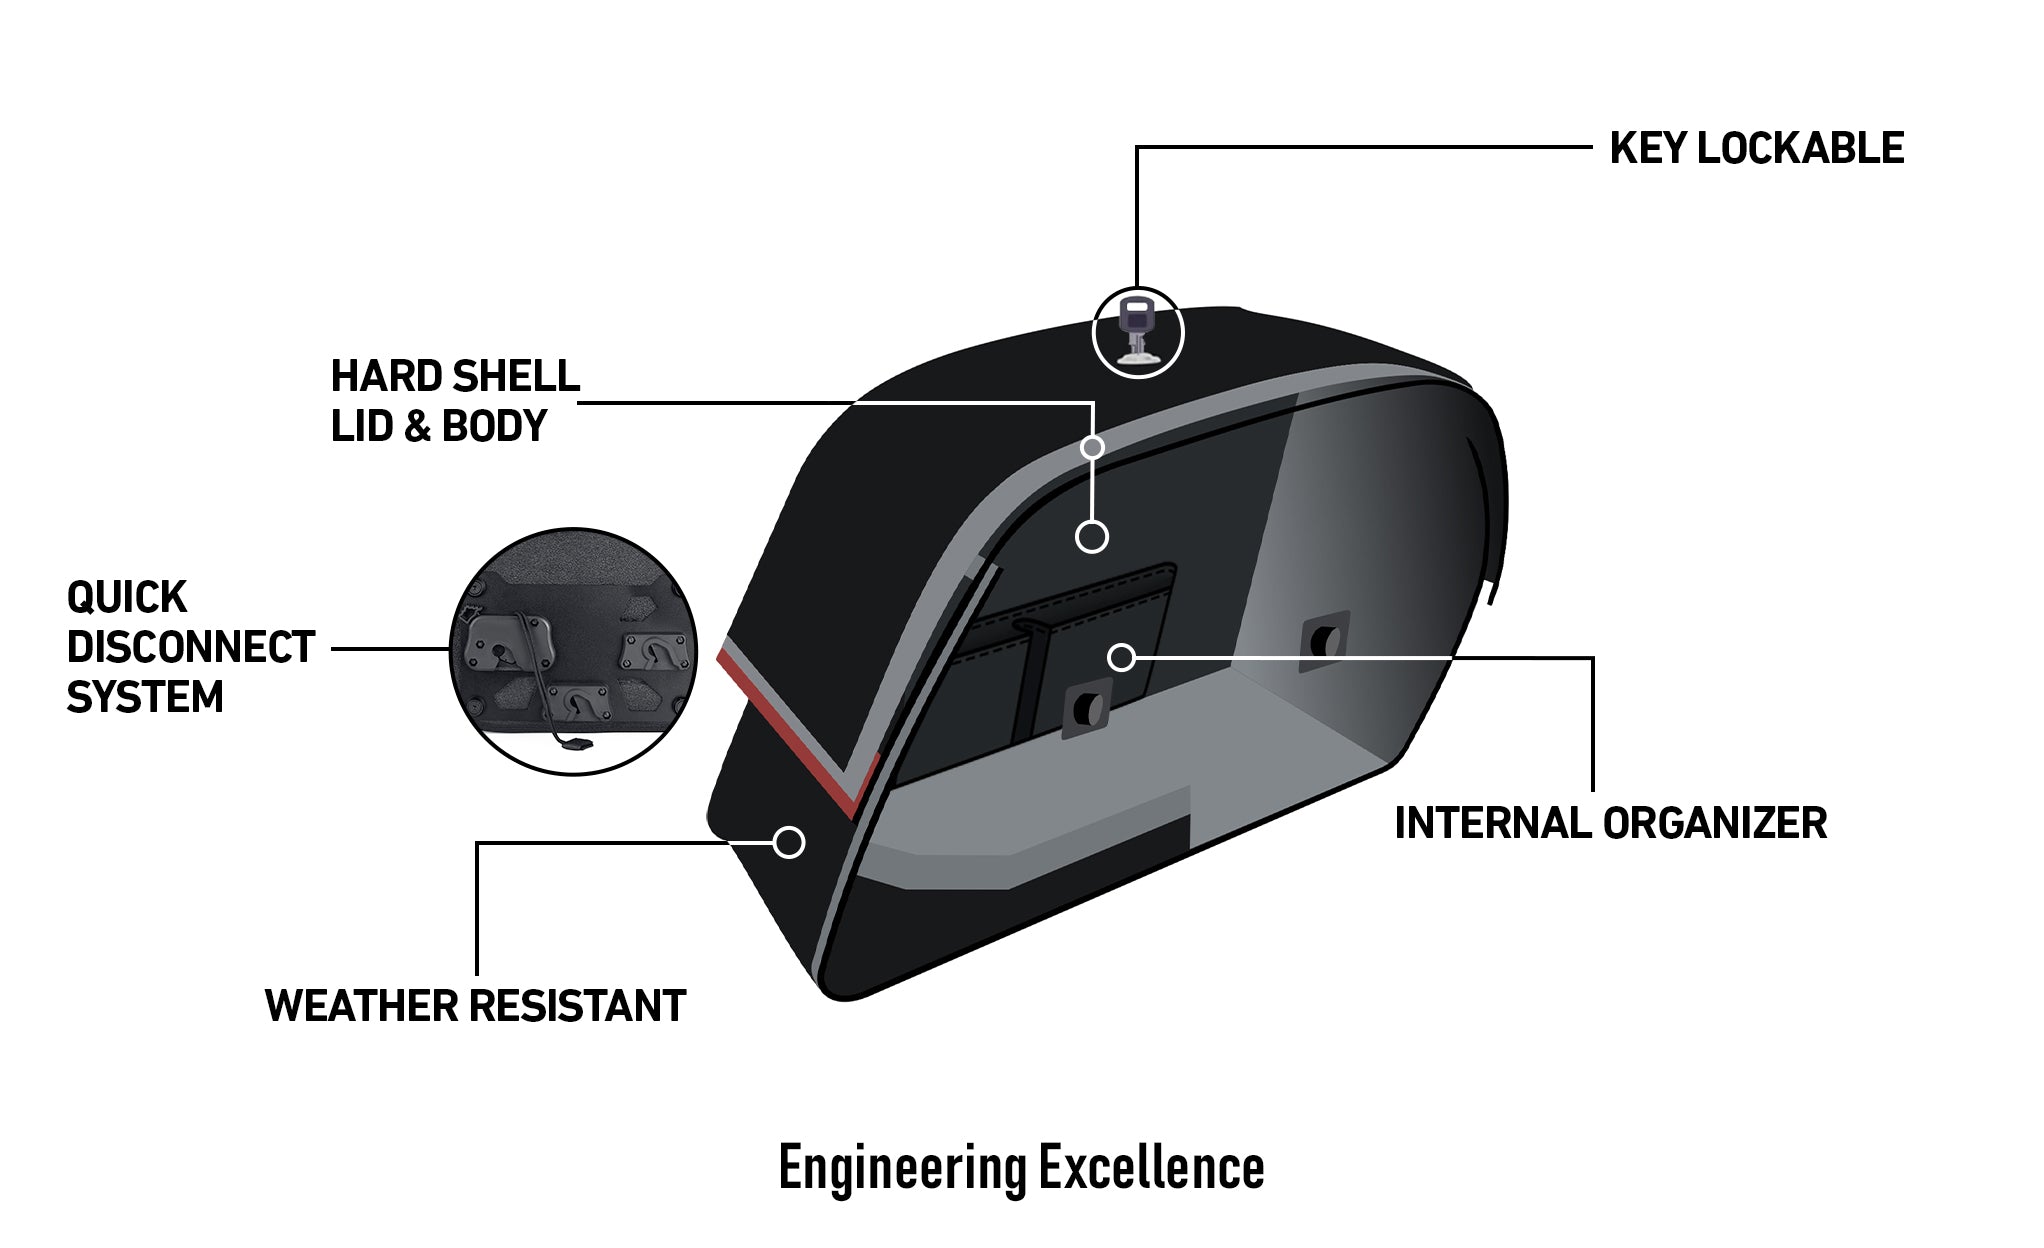 22L - Warrior Medium Quick-Mount Motorcycle Saddlebags For Harley Sportster 883 Custom XL883C Engineering Excellence @expand